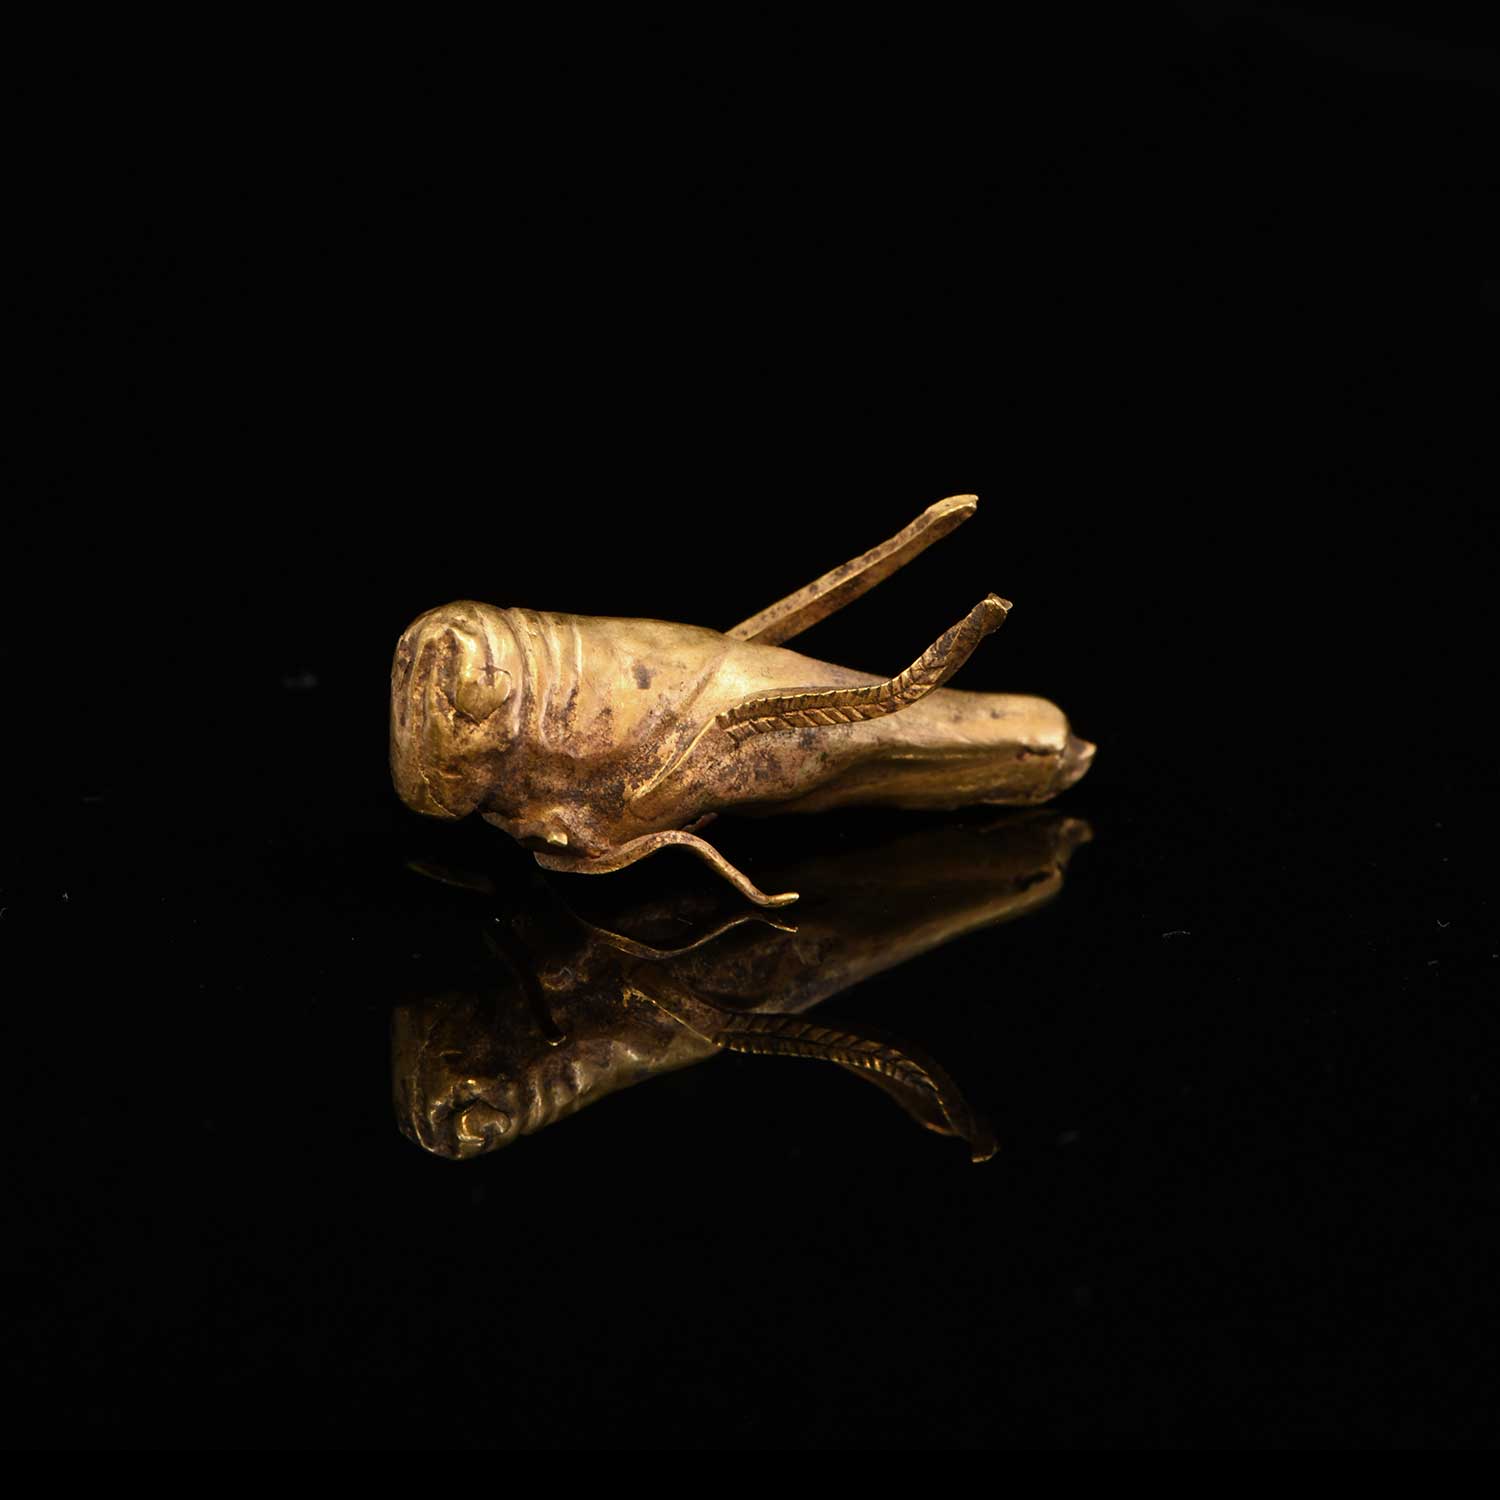 A Published Biblical Canaanite gold Locust, ca. 11th century BCE - Sands of Time Ancient Art